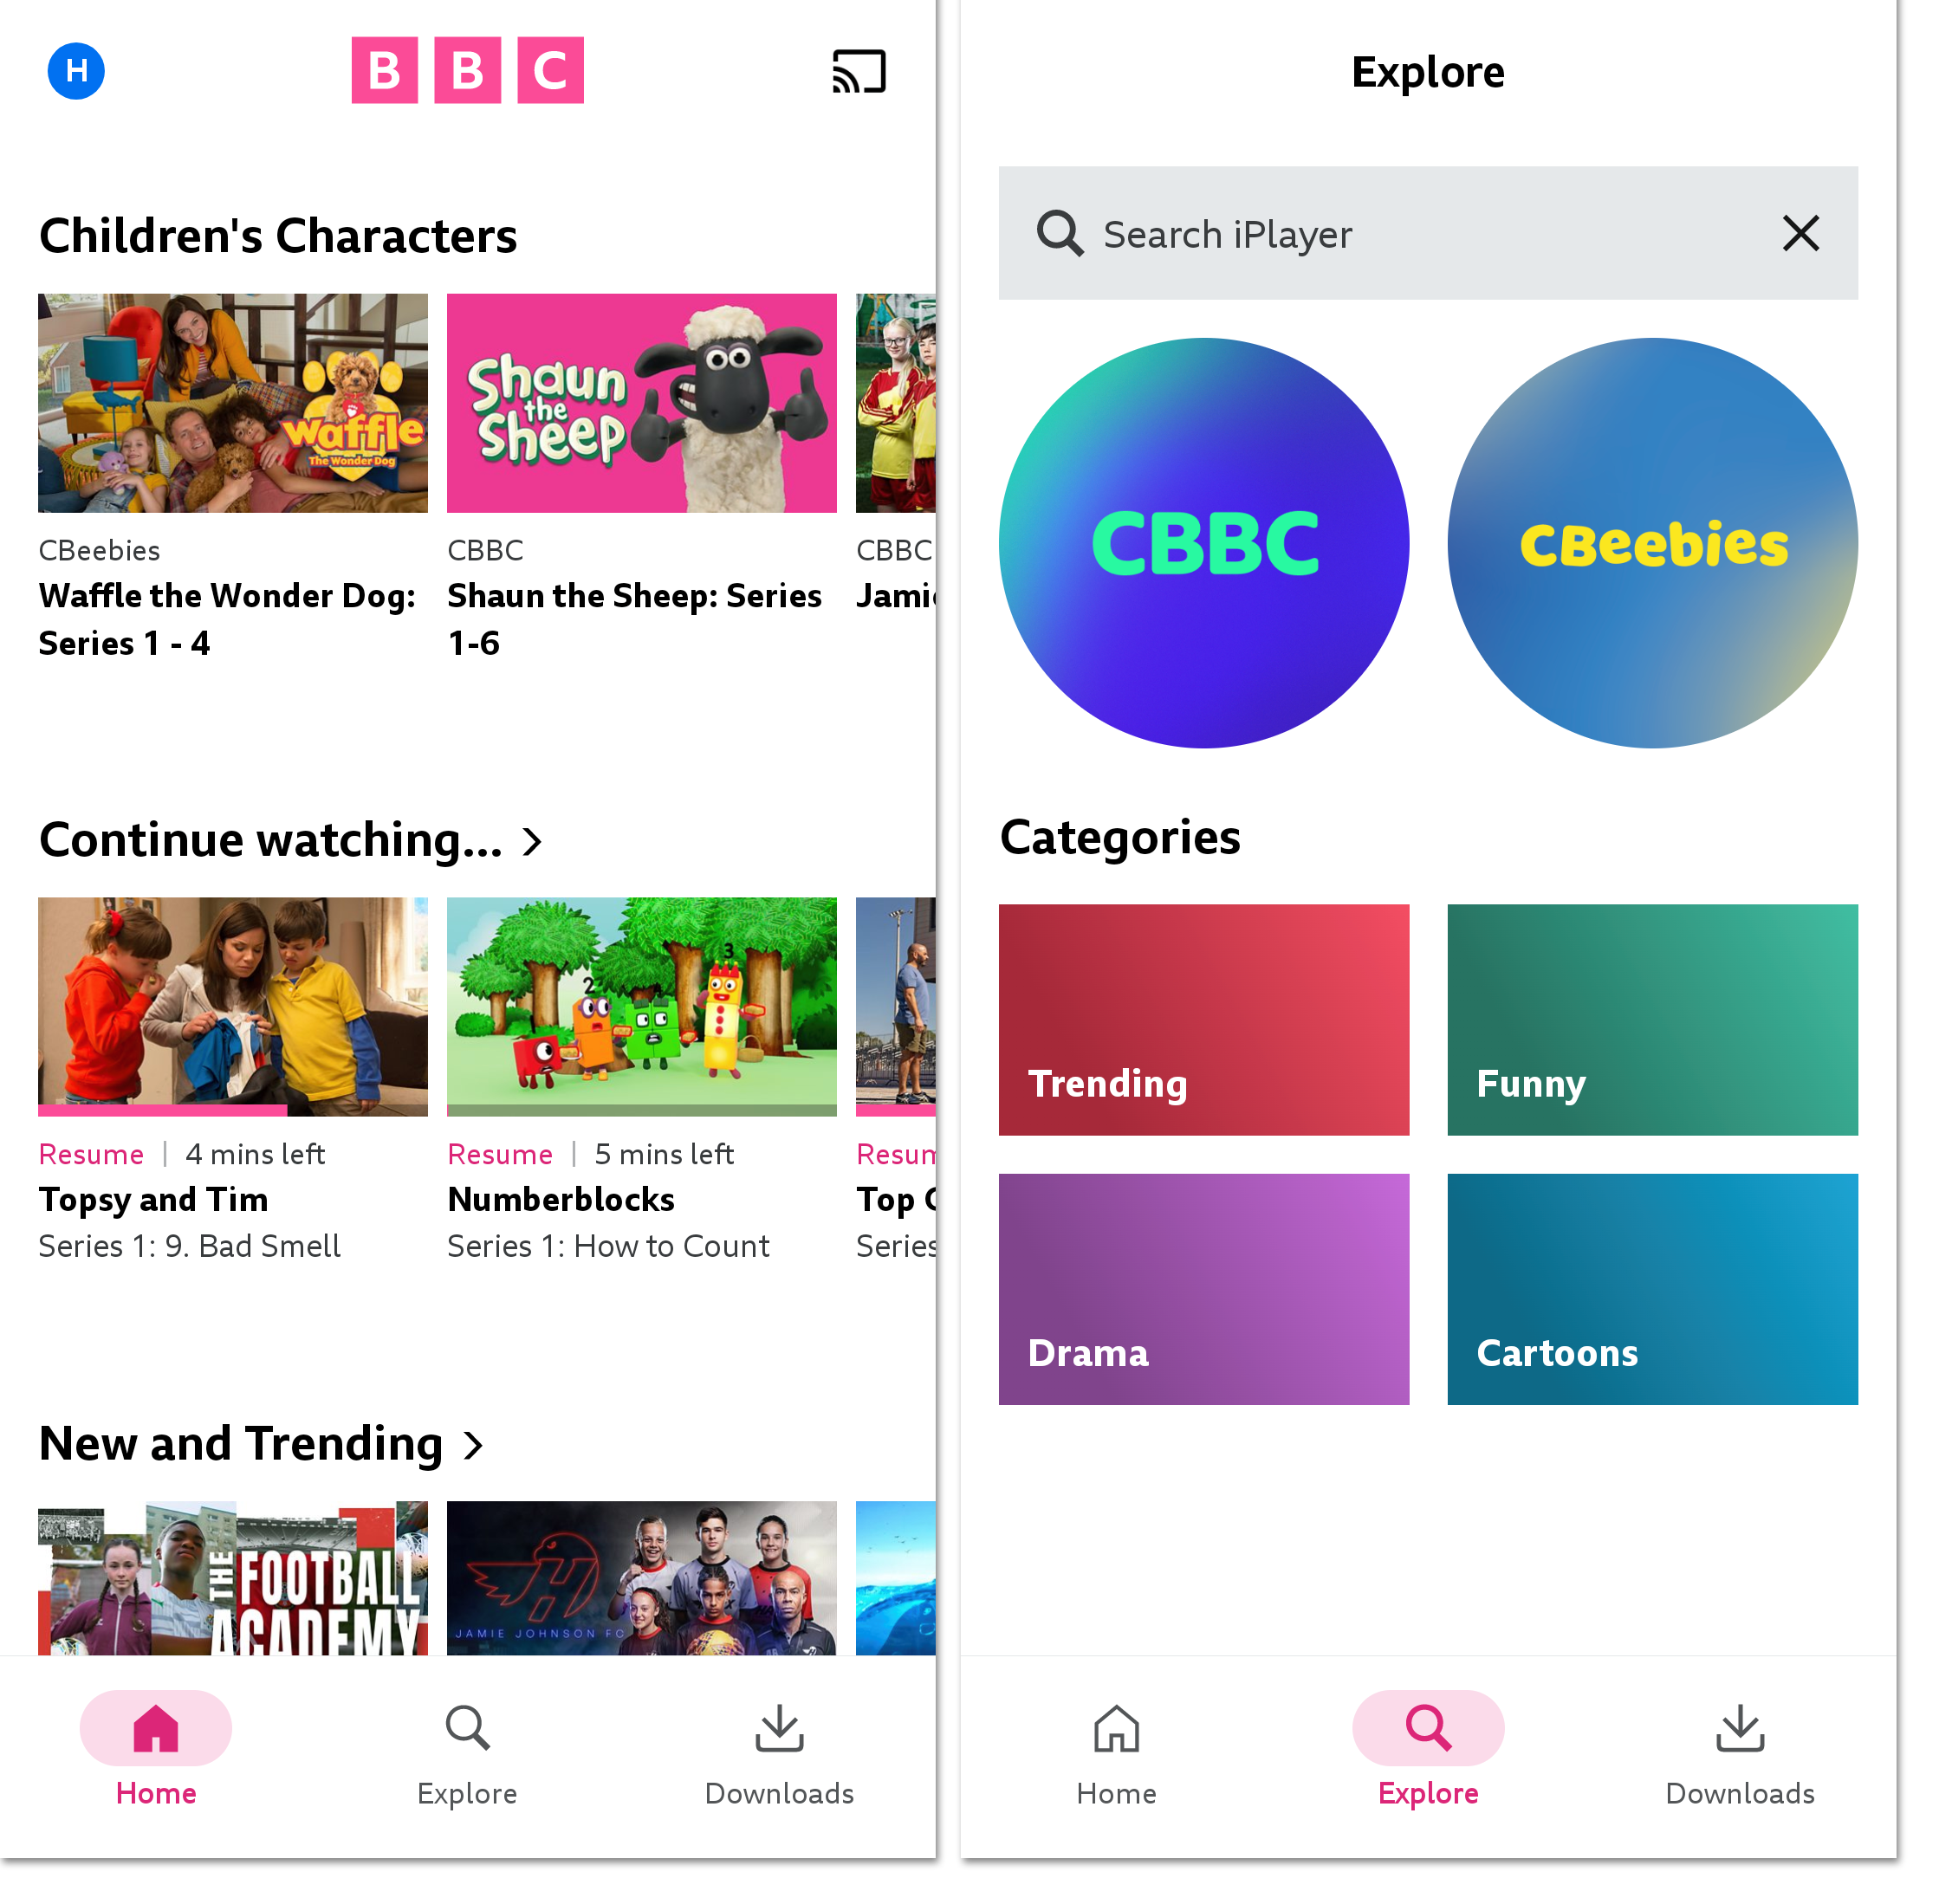 Two images of the BBC iPlayer mobile app when signed in as a child. The first shows the homepage which is bright, white and with lots of CBeebies programmes. The second is of the Explore menu which offers CBBC and CBeebies channels, and children's categories